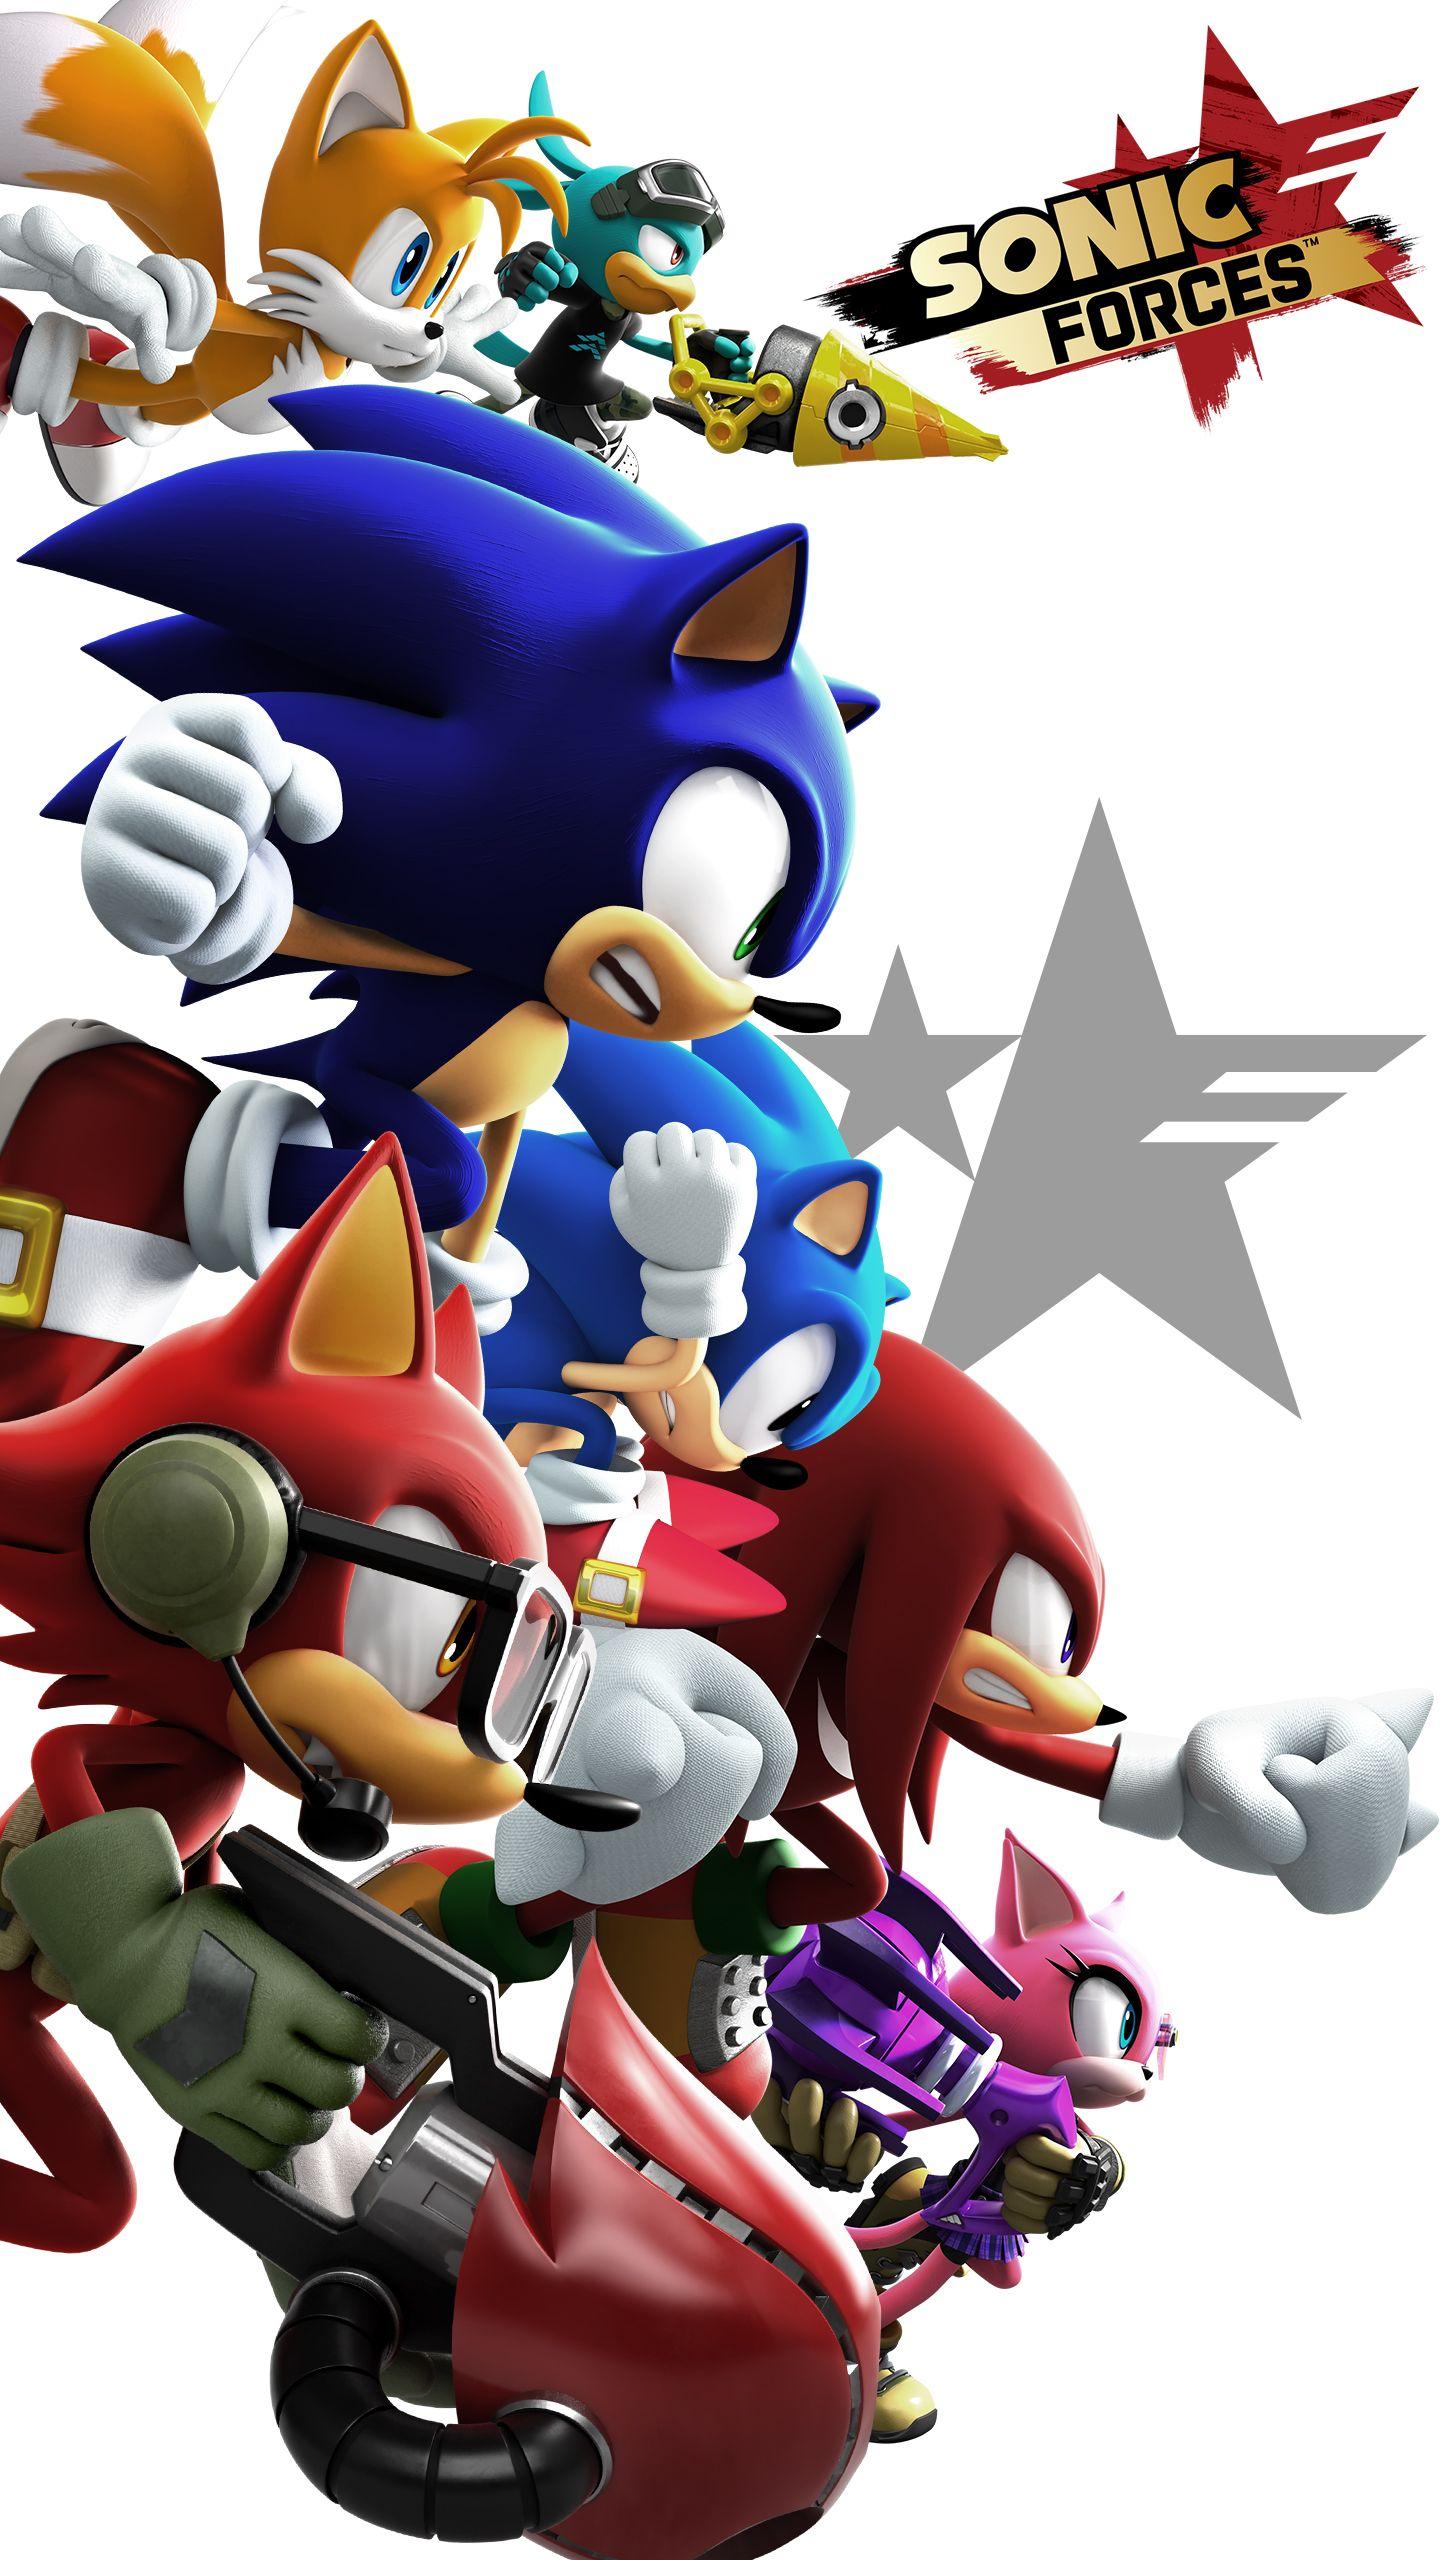 Sonic Forces Heroes Wallpaper -1440x2560- Sonic News